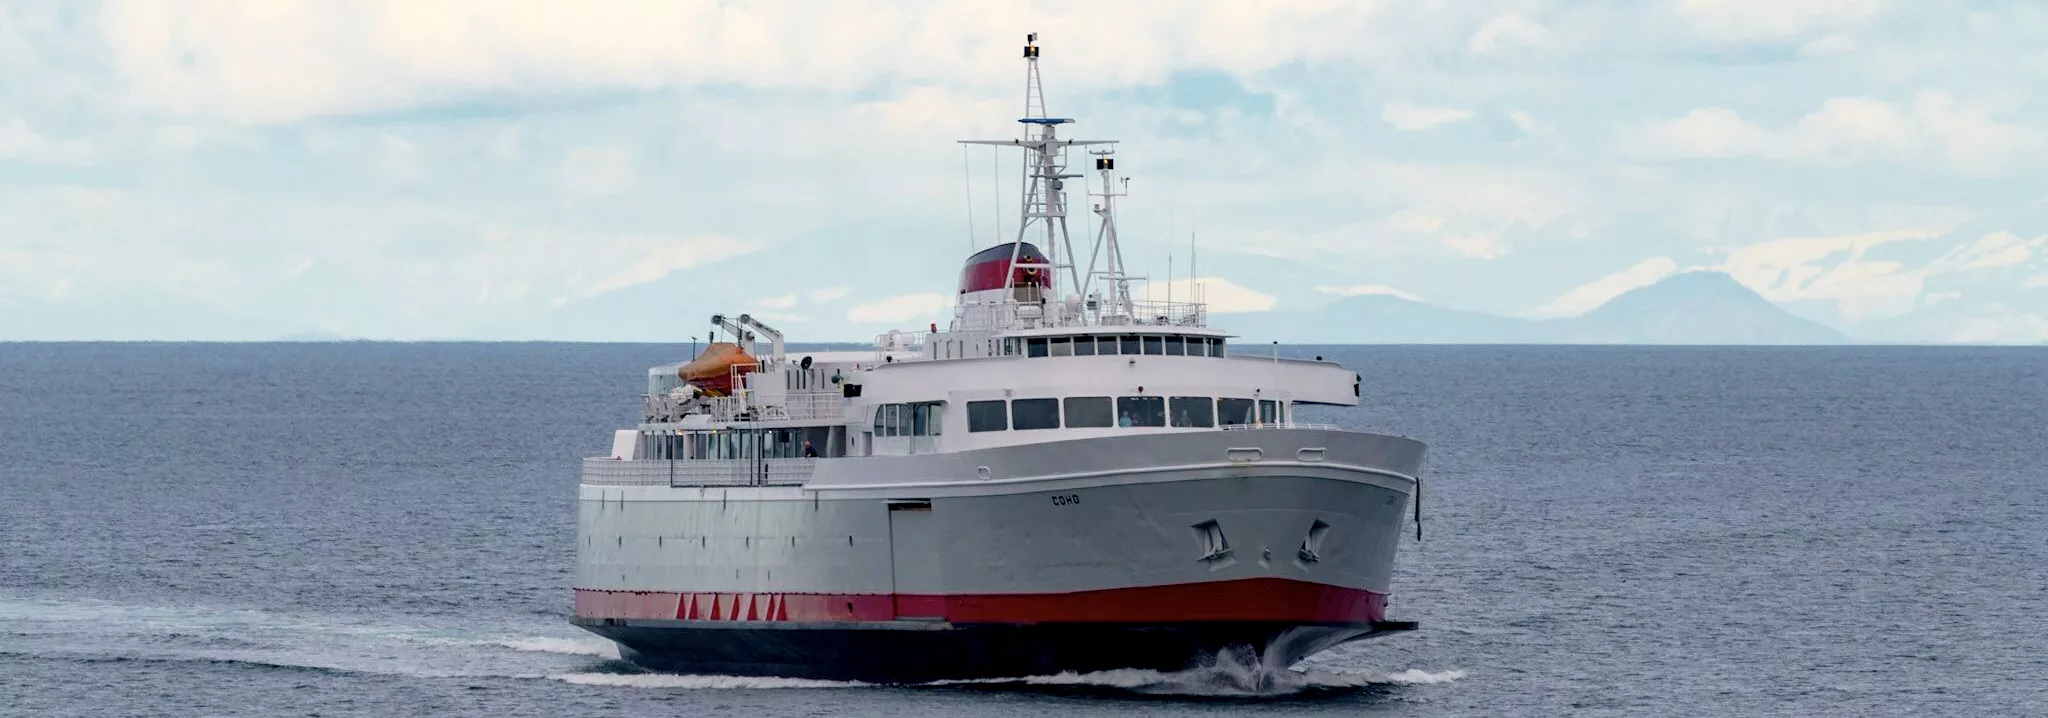 Black Ball Ferry Line in Canada, North America | Excursions - Rated 4.5